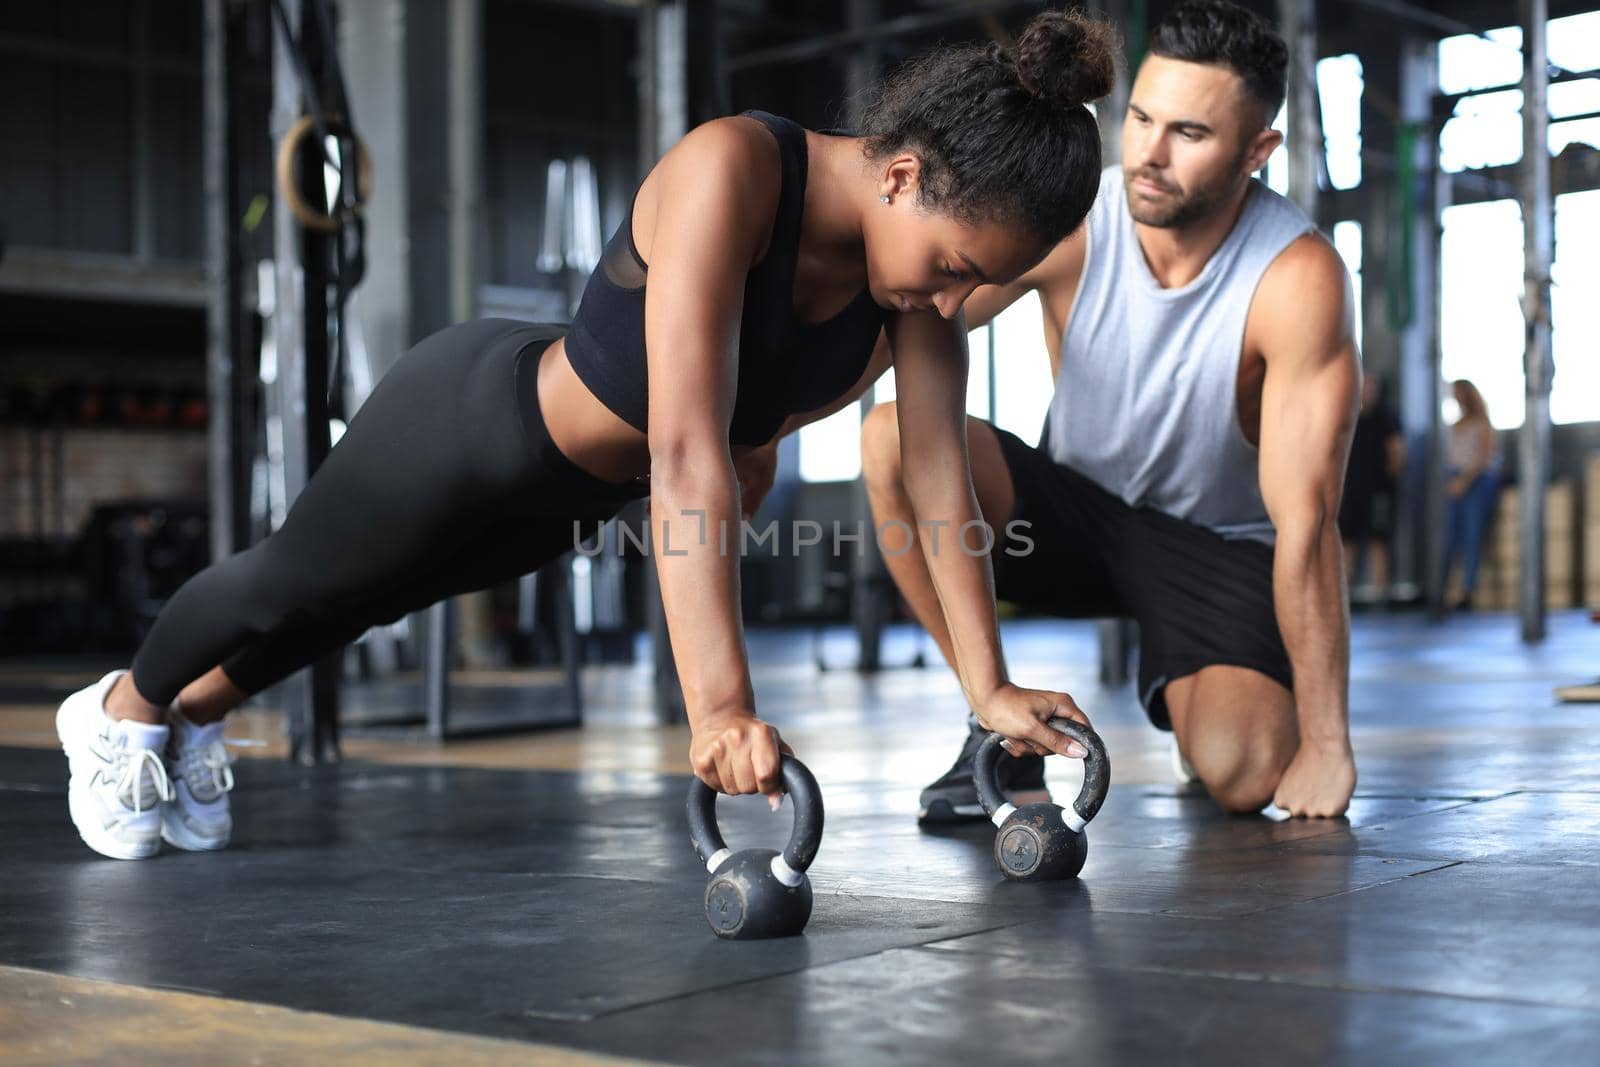 Sporty woman doing push-up in a gym, her boyfriend is watching her